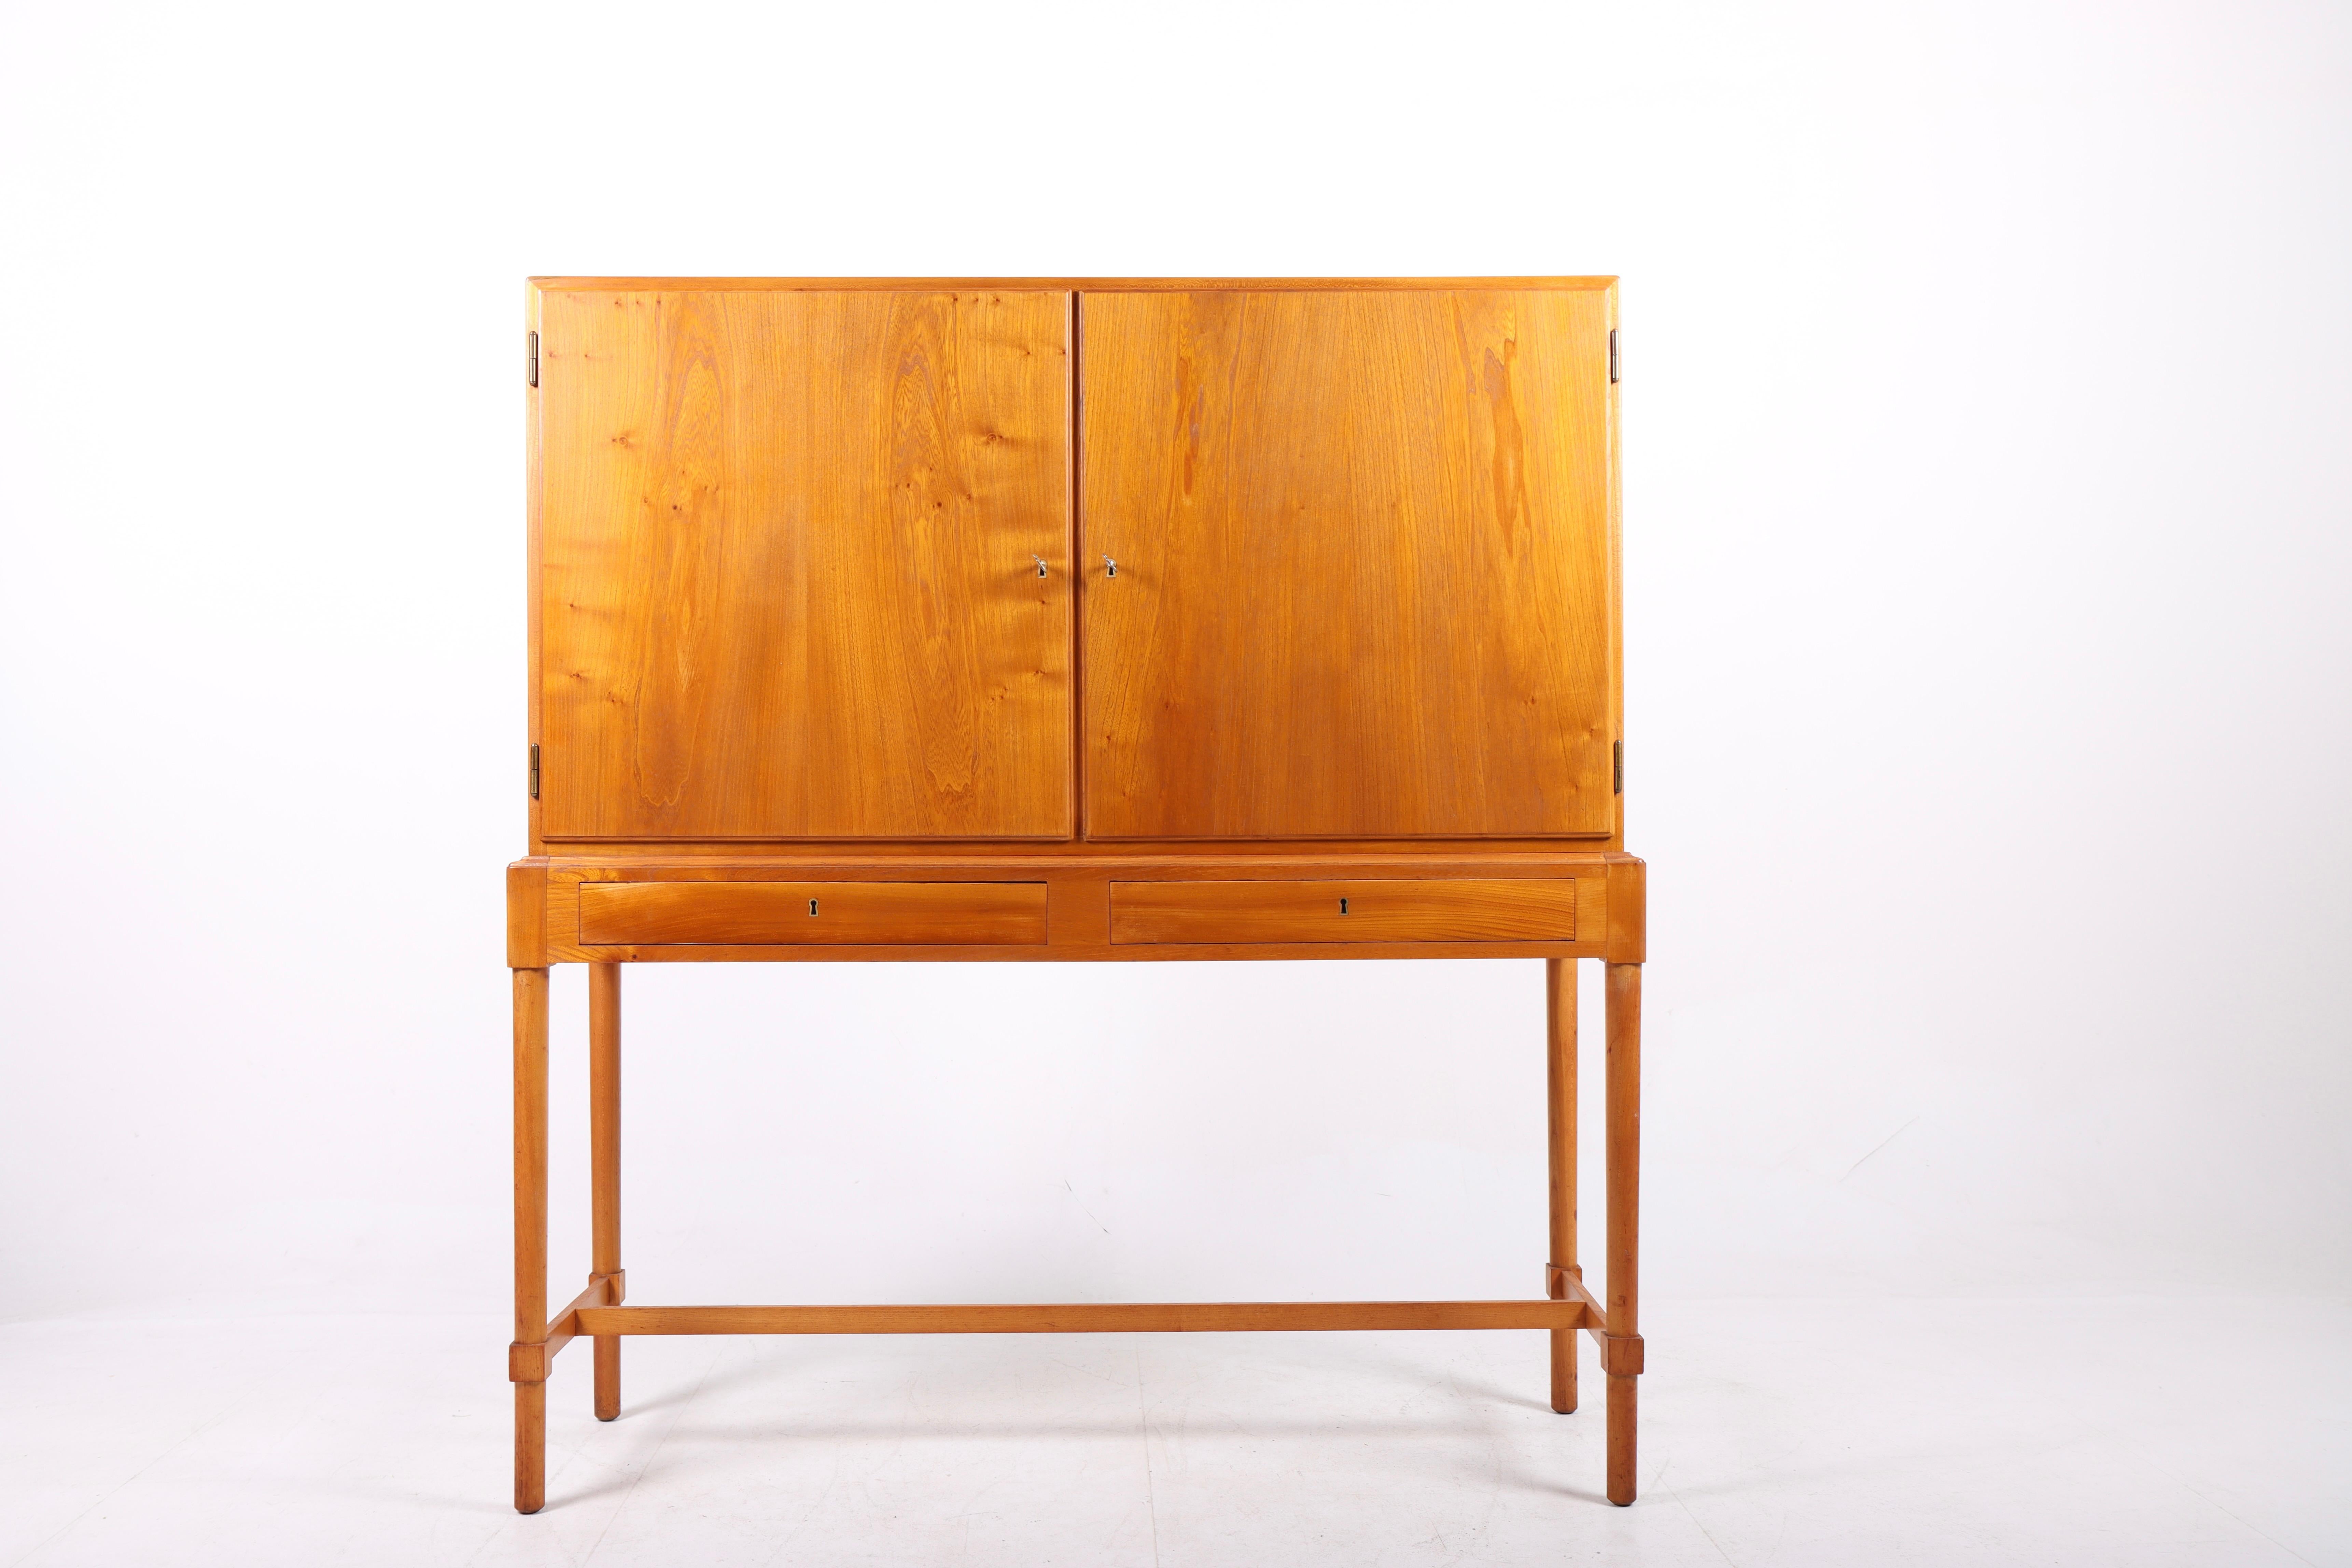 Cabinet in elm wood. Designed by MAA. Børge Mogensen in 1950s, this piece is made by FDB cabinetmakers Denmark. Great original condition.